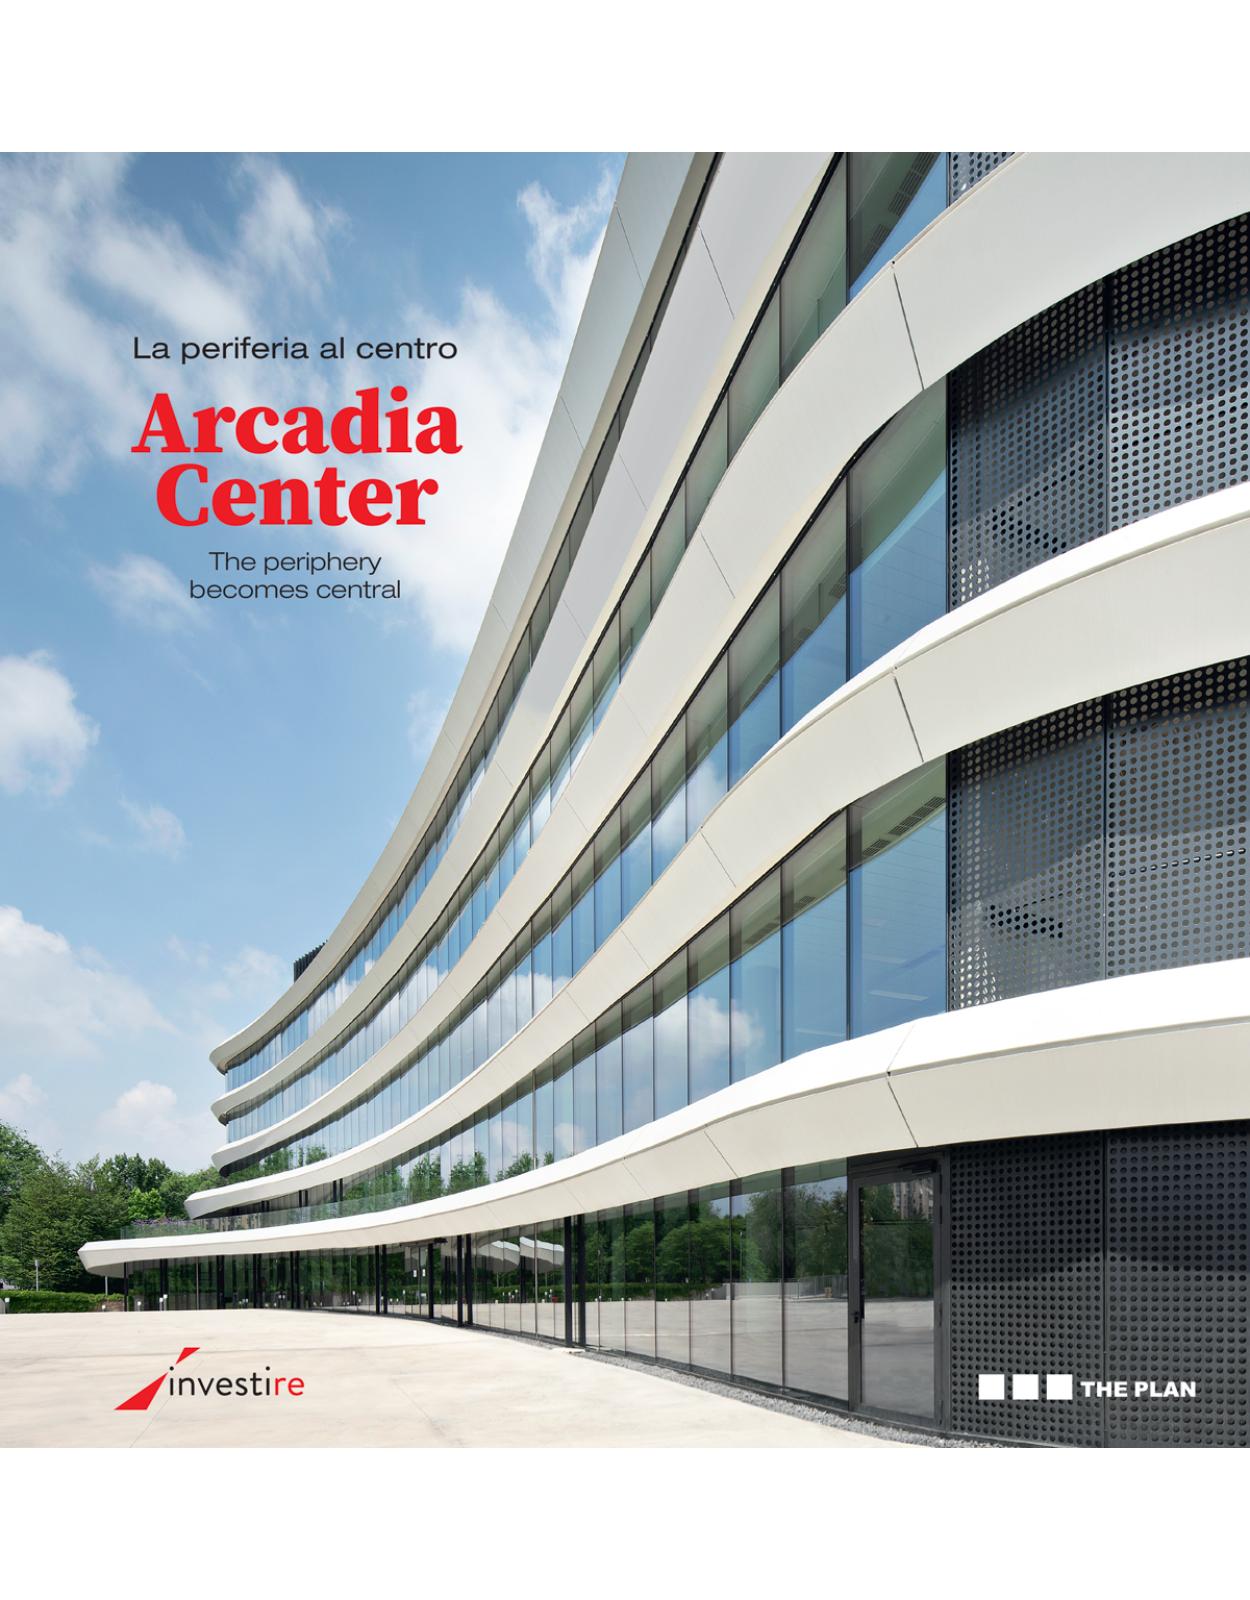 ARCADIA CENTER - THE PERIPHERY BECOMES CENTRAL